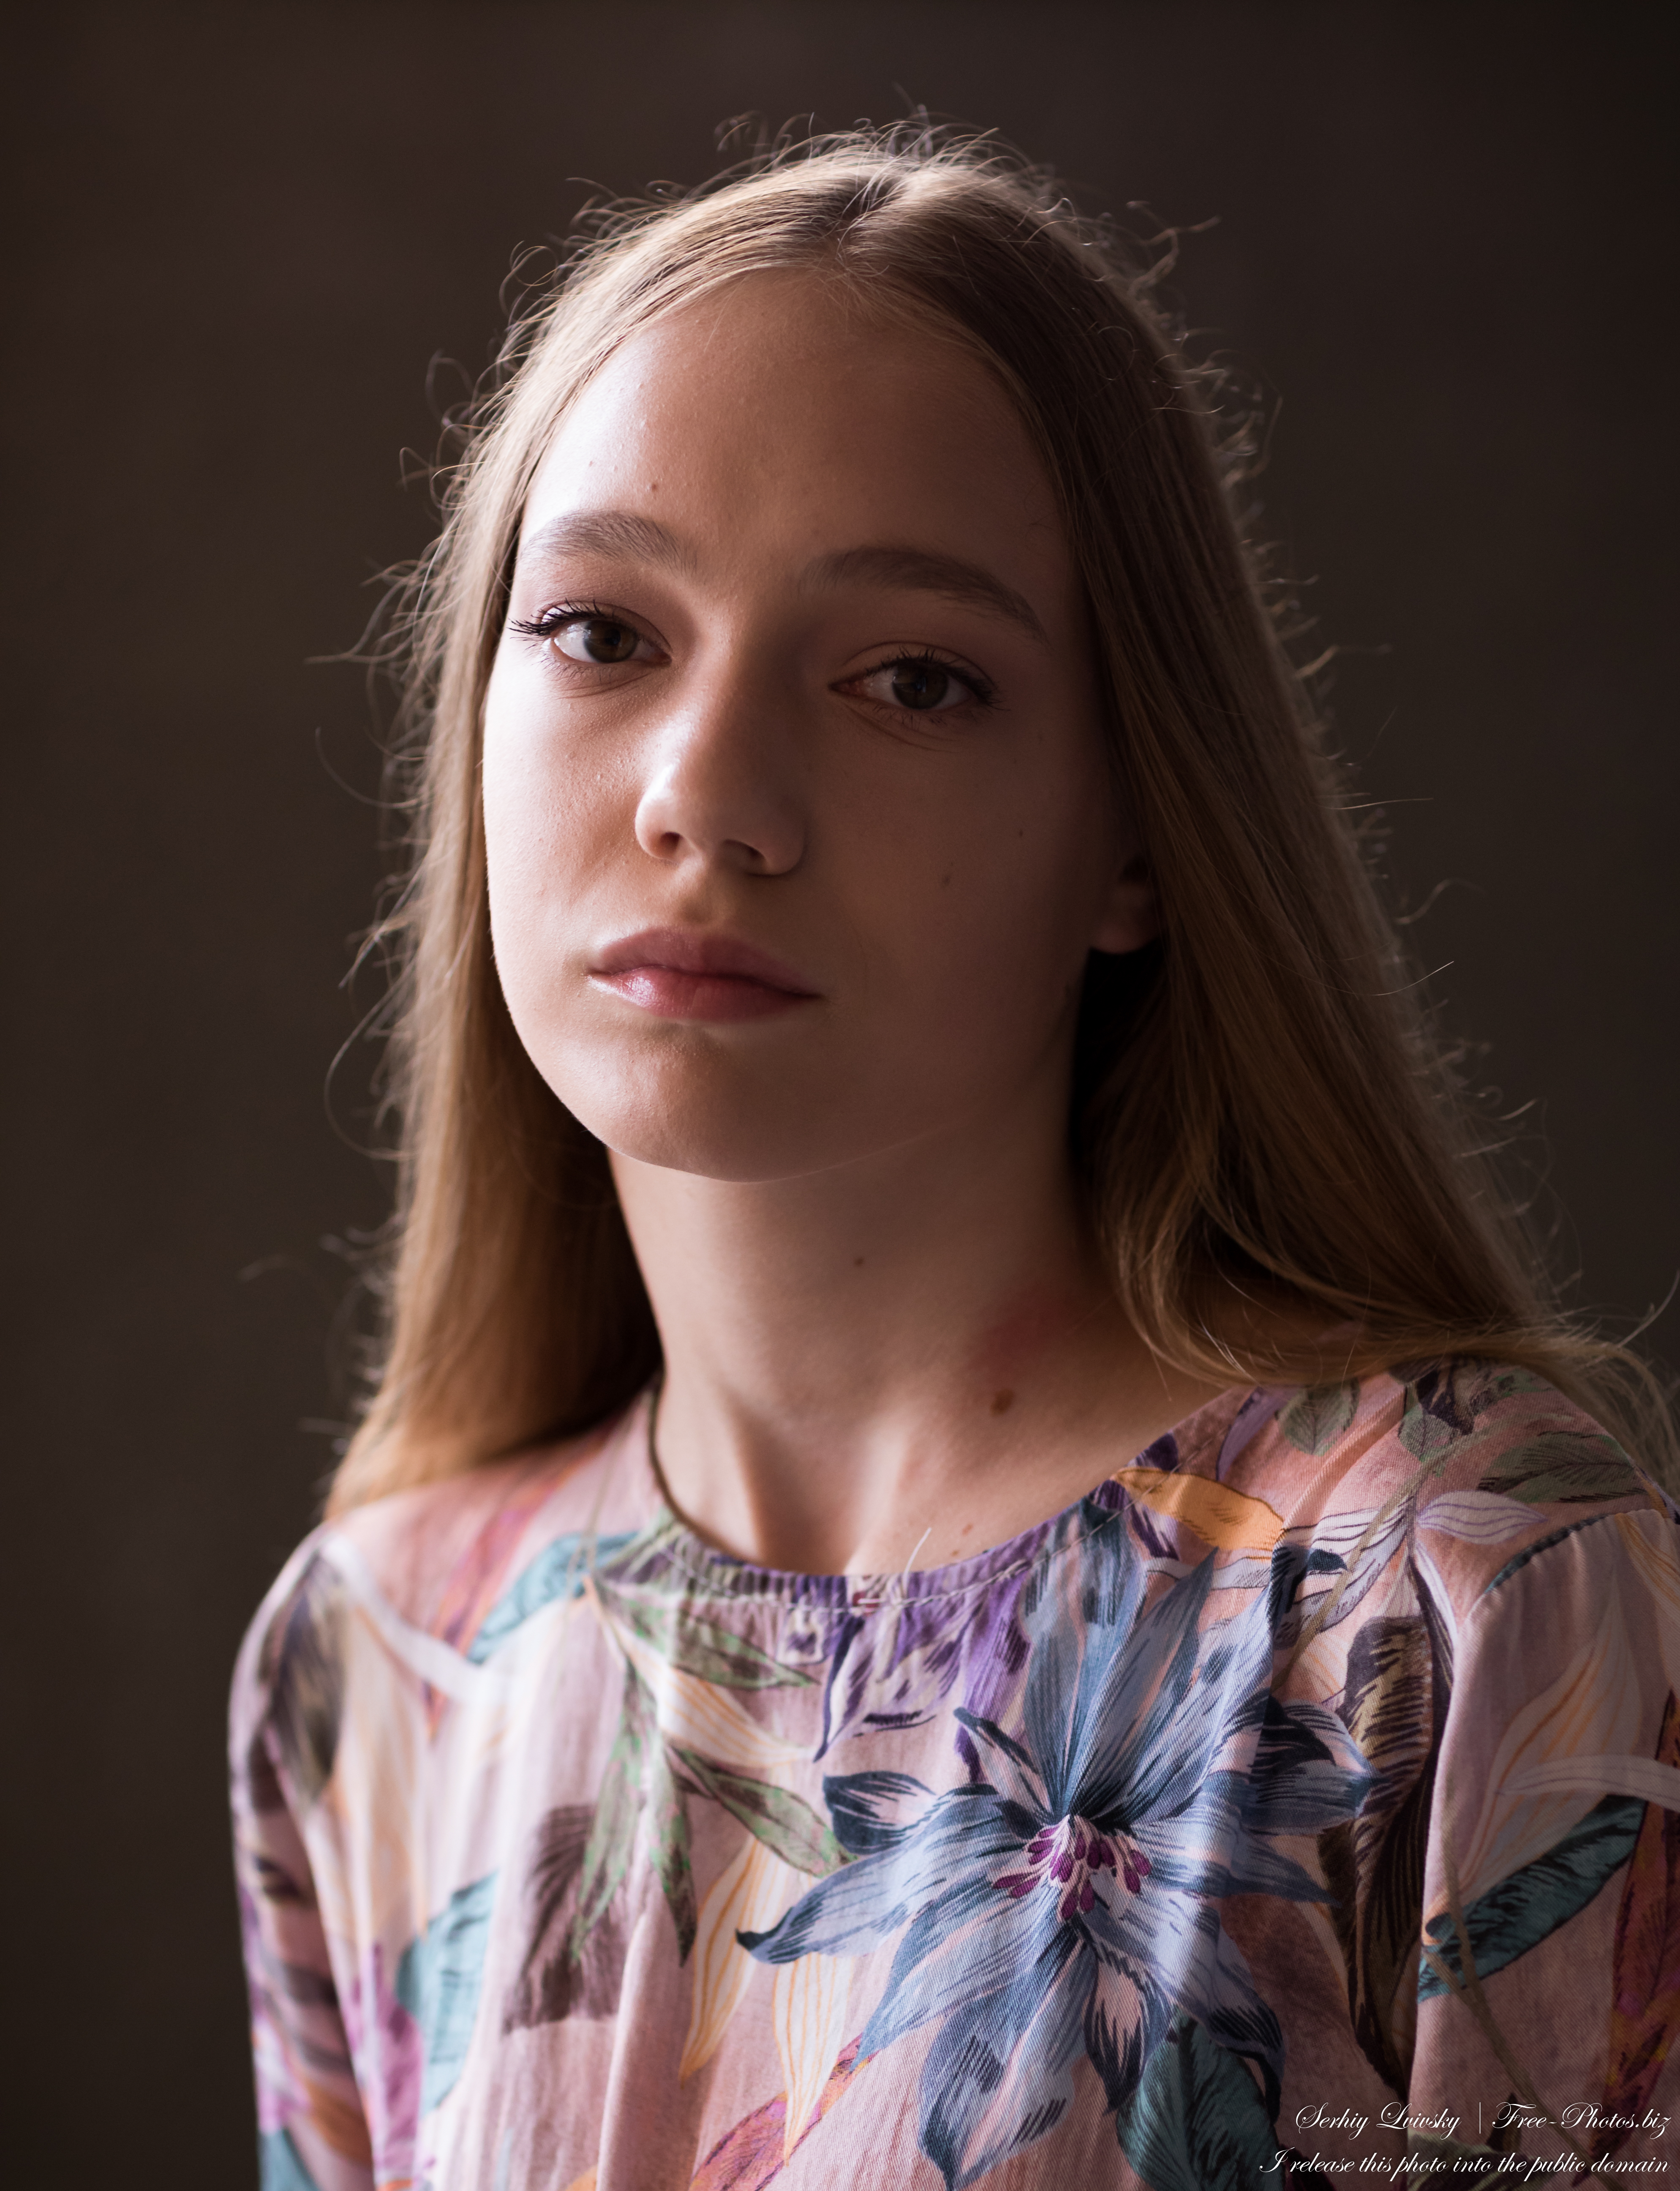 marta_a_16-year-old_natural_blonde_girl_photographed_by_serhiy_lvivsky_in_july_2020_10